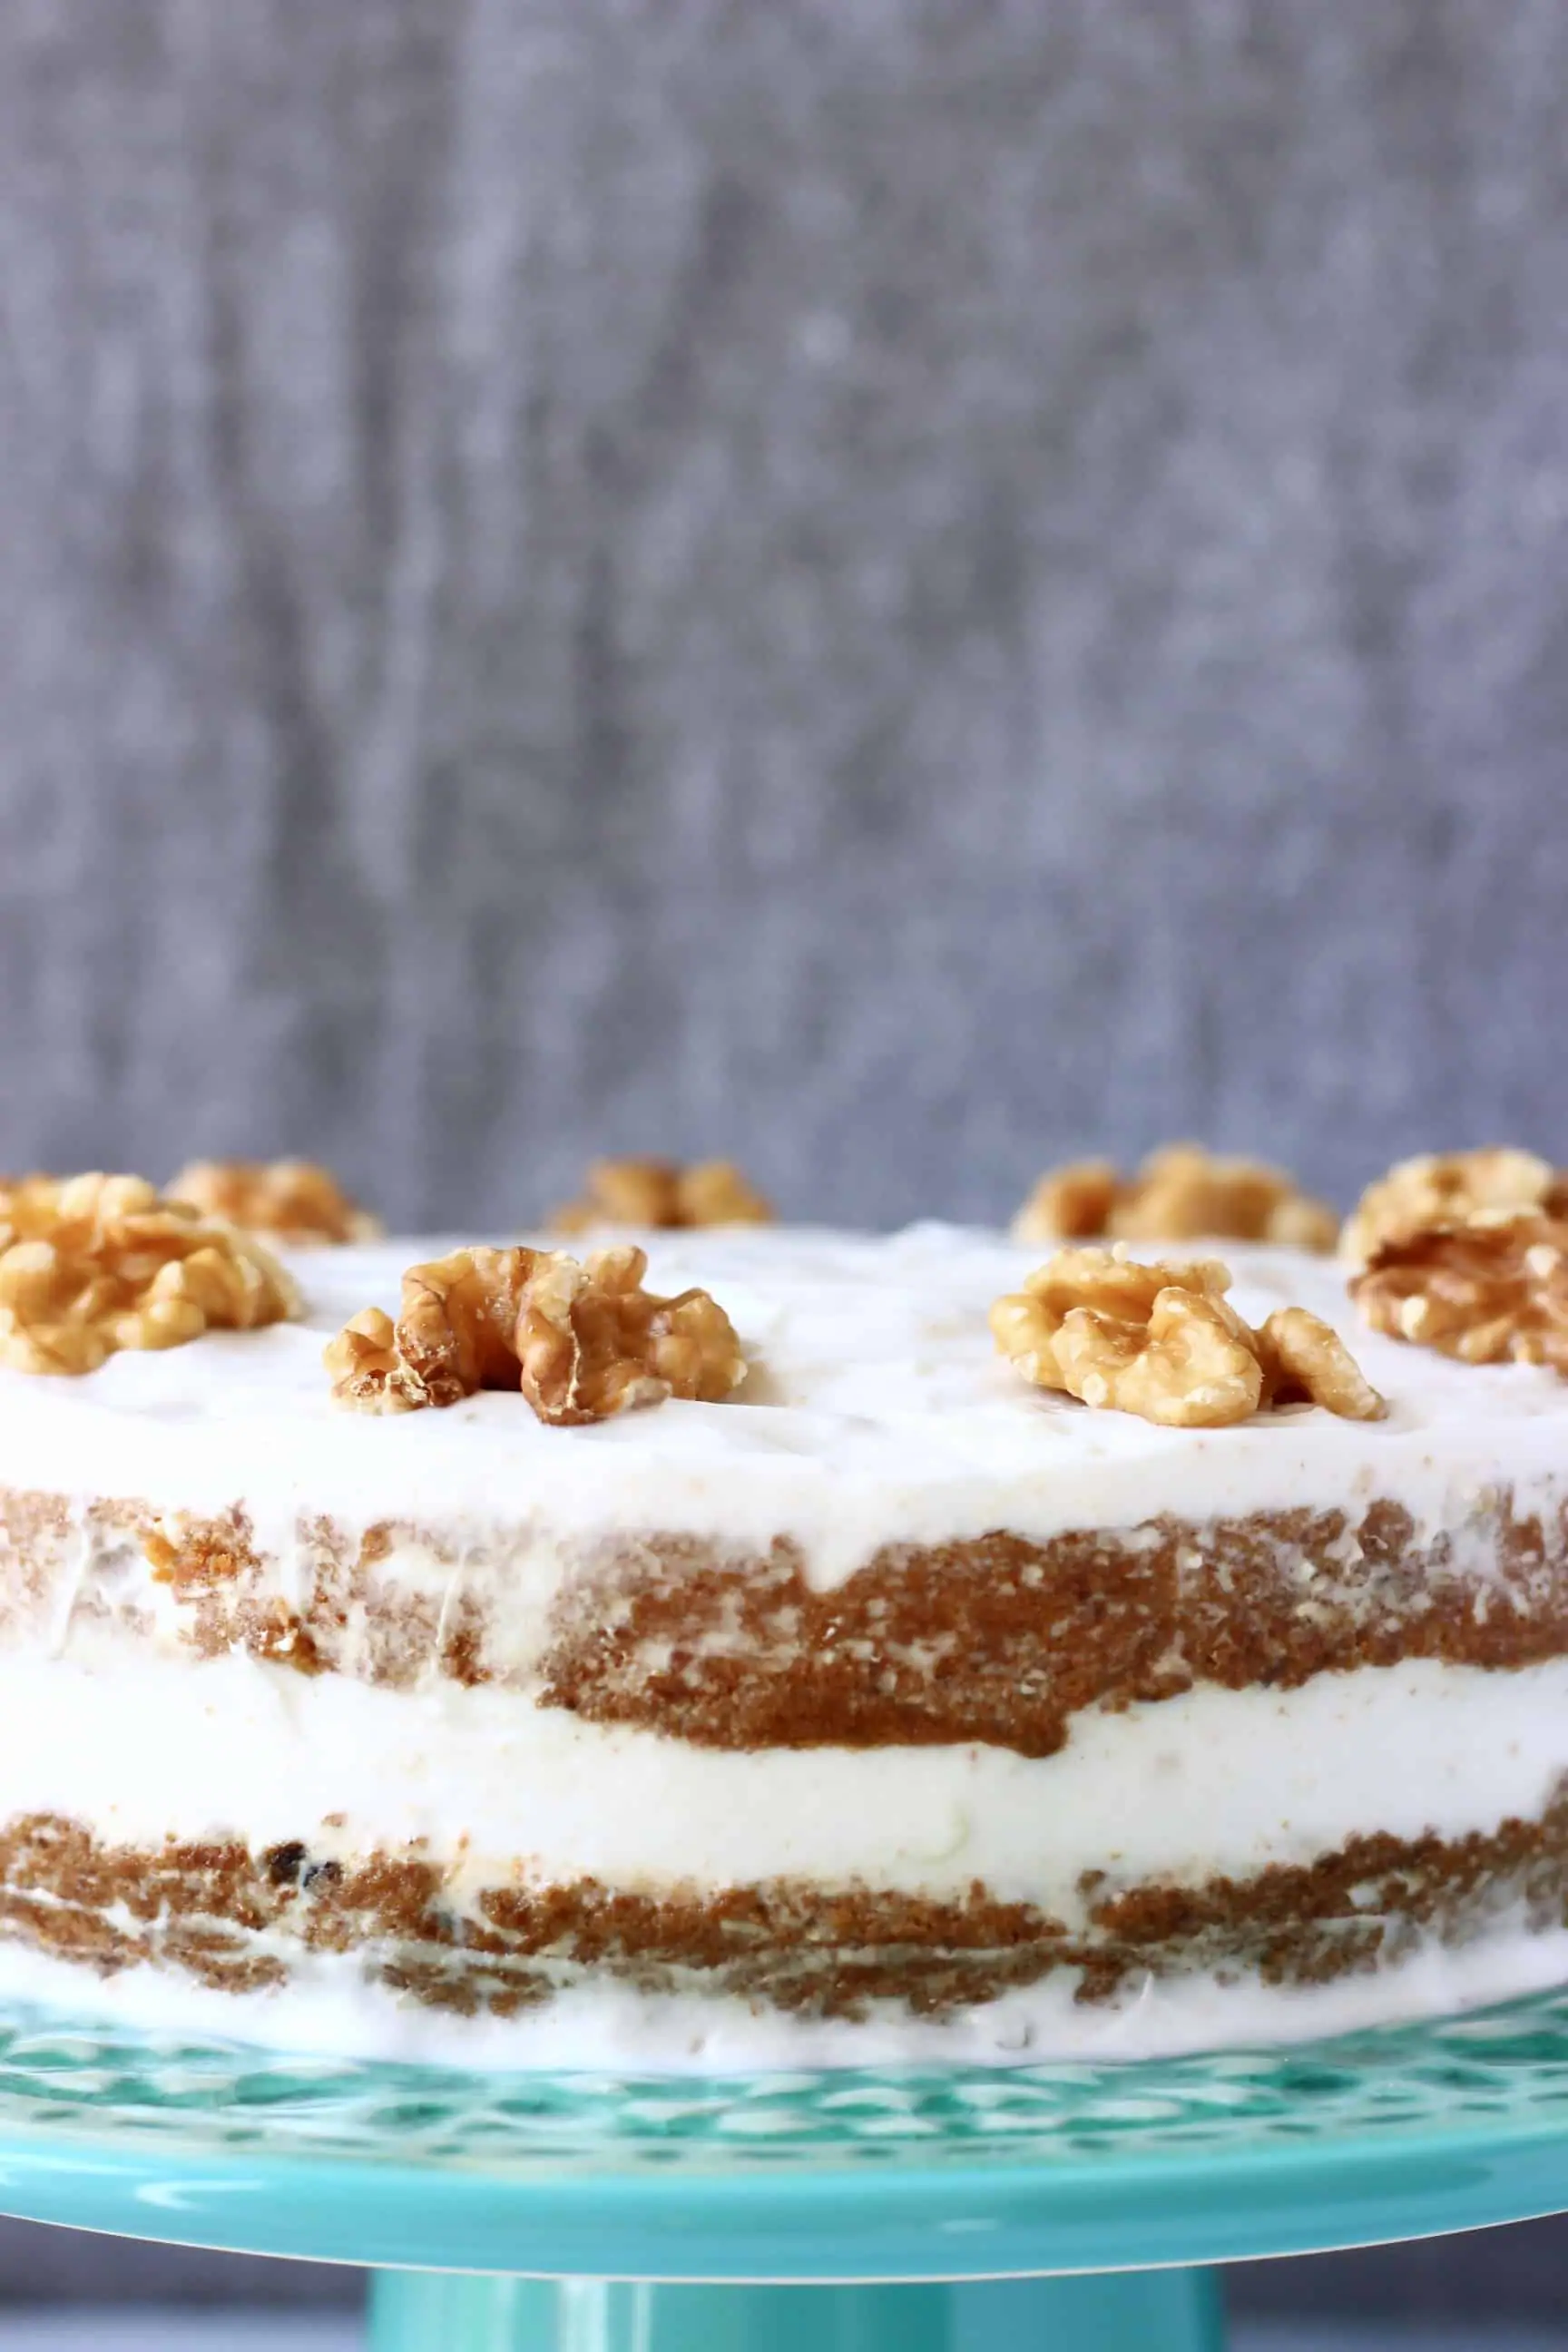 A vegan carrot cake covered in white frosting topped with walnuts against a grey background